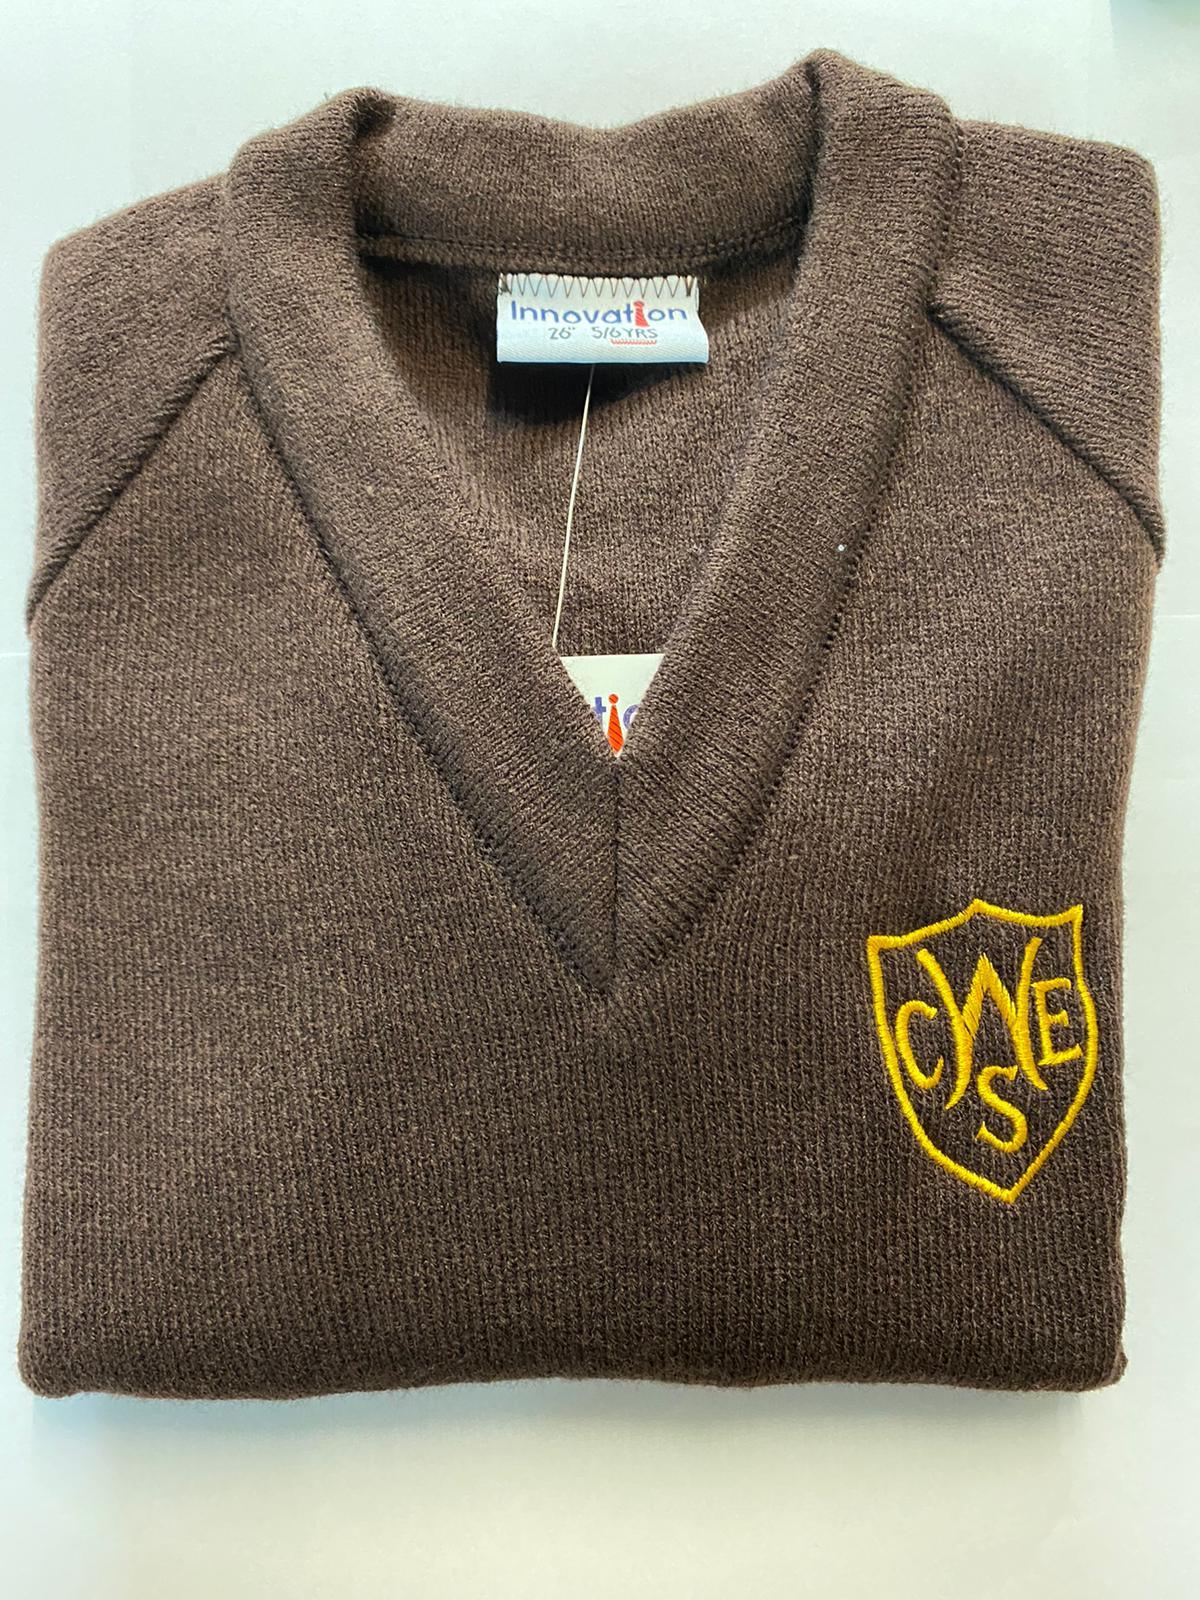 The Wickford Infant School - Brown Knitwear (Knitted) Jumper with School Logo - Schoolwear Centres | School Uniform Centres